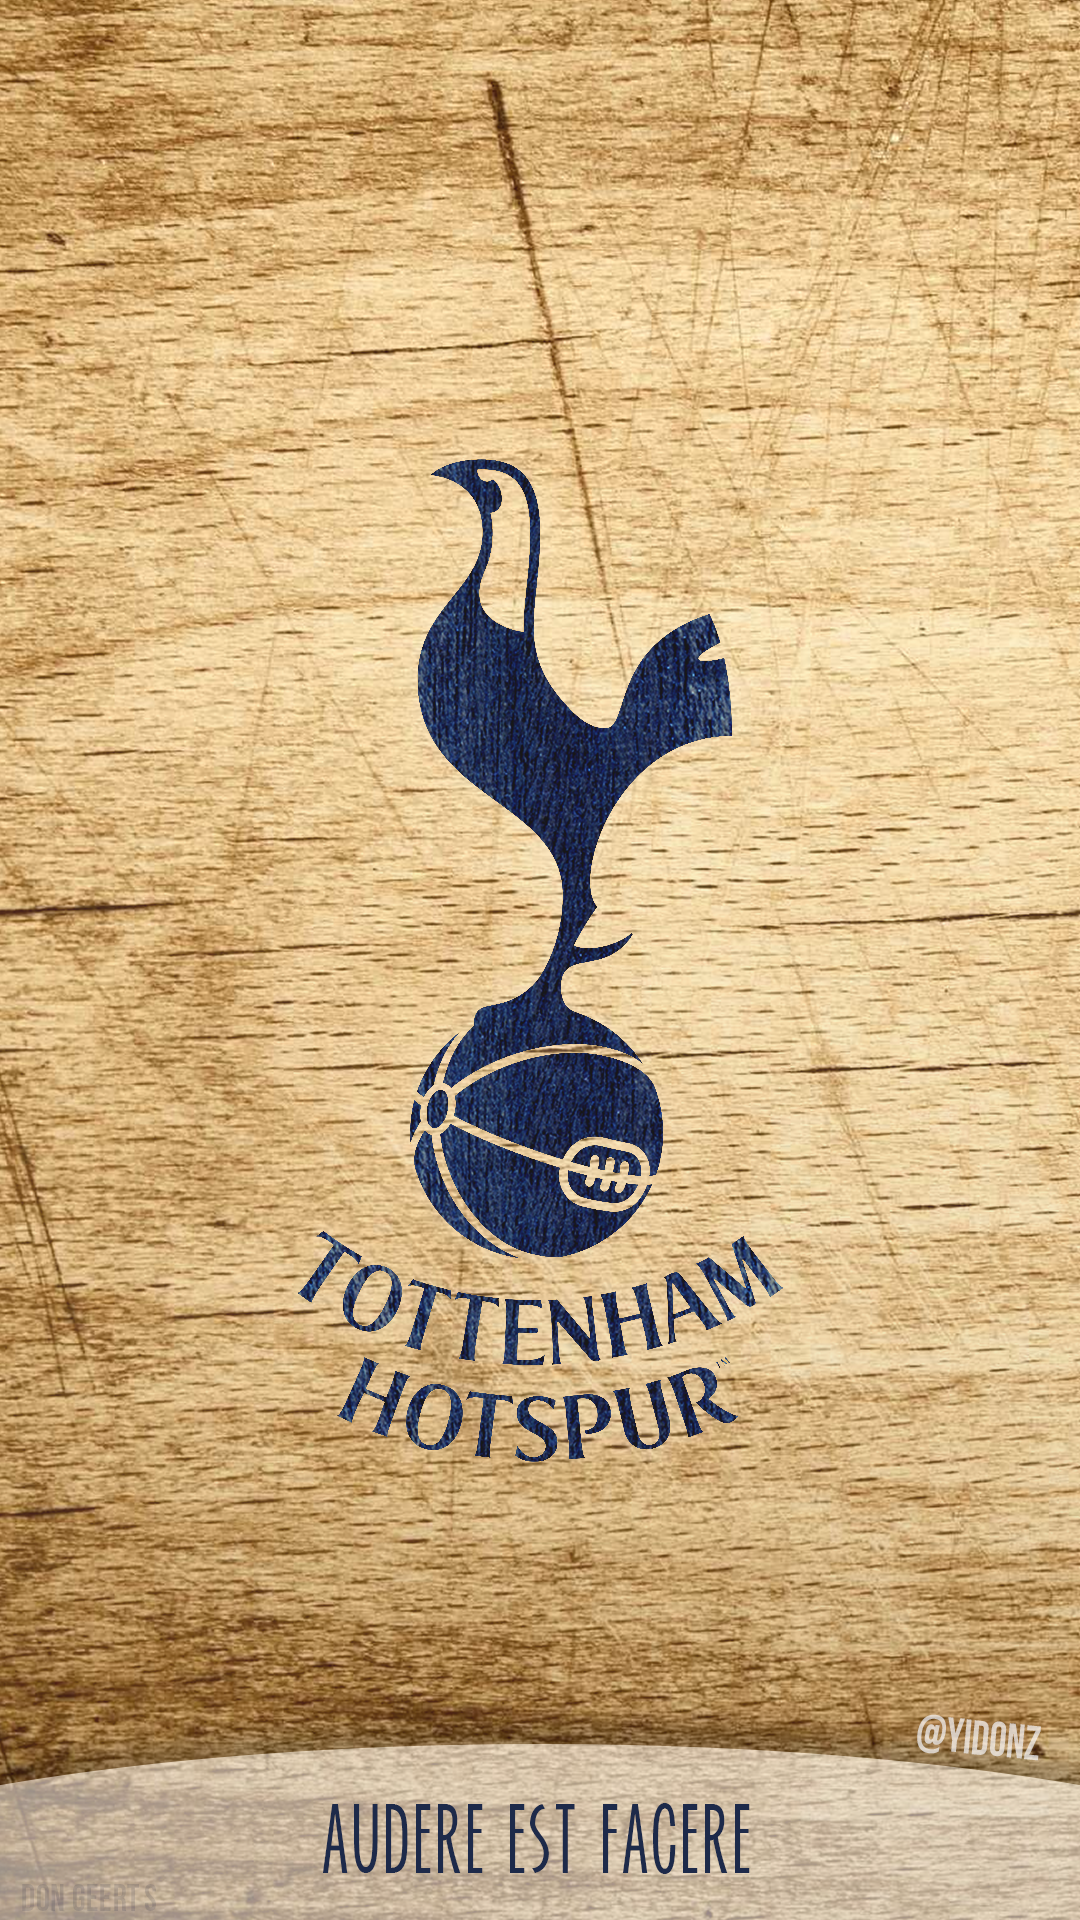 Spurs Wallpapers by donioli on DeviantArt